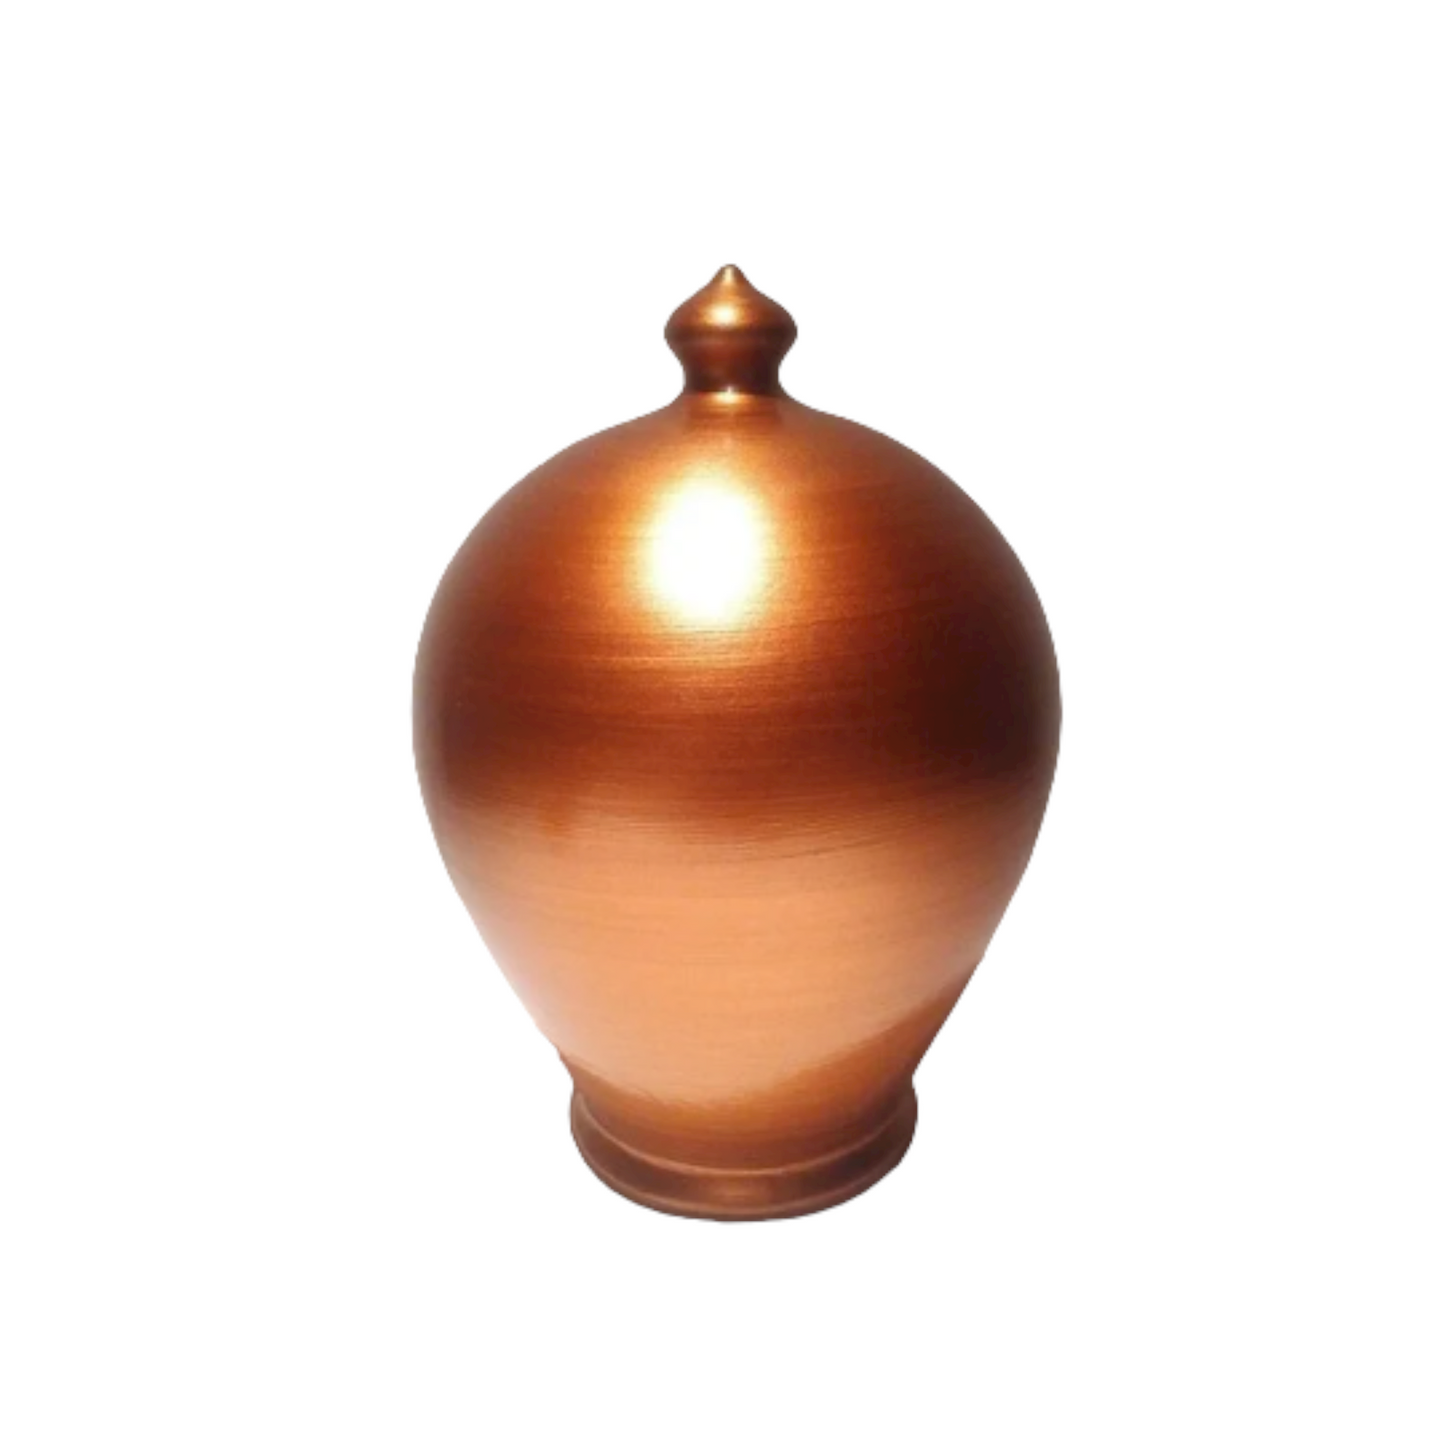 Handmade in Italy, the ideal gift for piggy bank lovers both kids and adults! Color: Copper, as in picture. 💰Size: 15 cm = 5.90 inches in height. Circumference: 40 cm = 15.74 inches. With hole and stopper plug, or without hole.